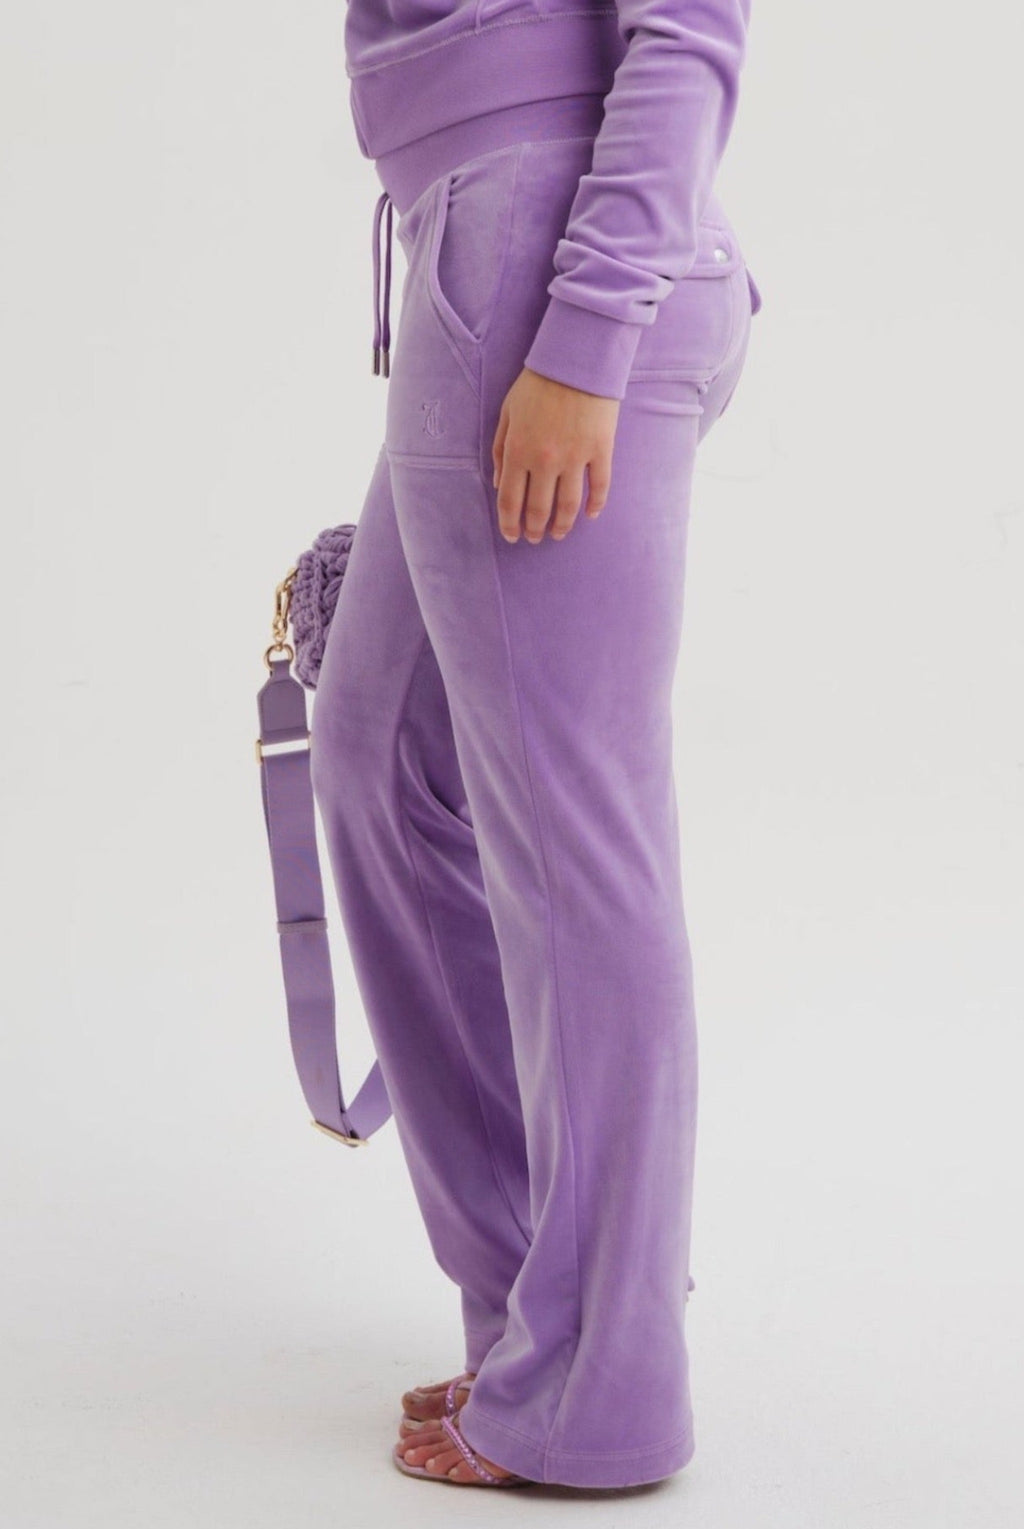 SHEER LILAC CLASSIC VELOUR DEL RAY POCKETED BOTTOMS